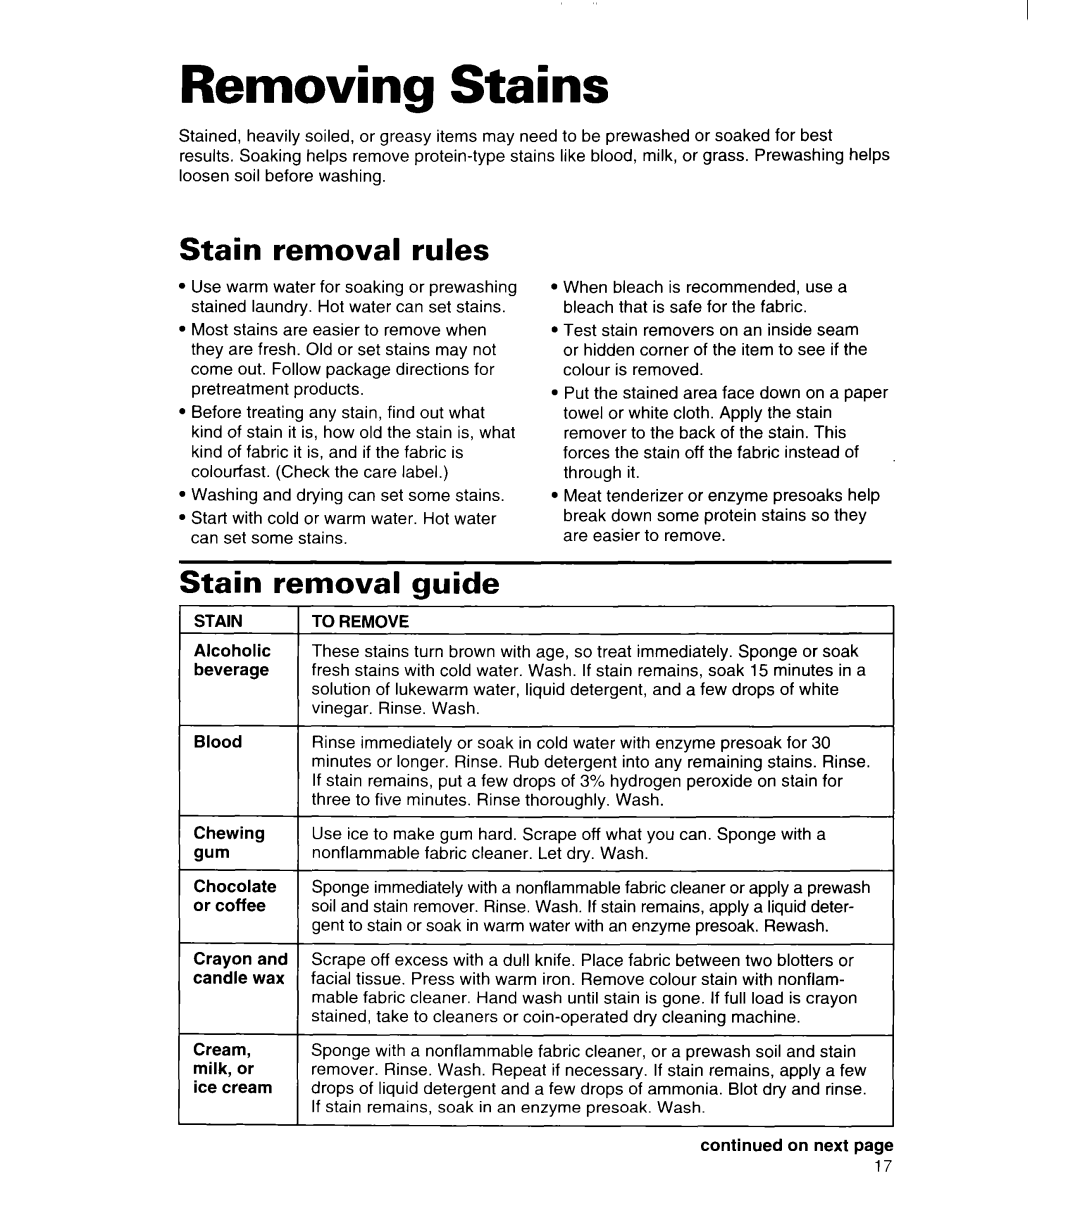 Whirlpool 3363834 warranty Removing Stains, Stain removal rules, guide 